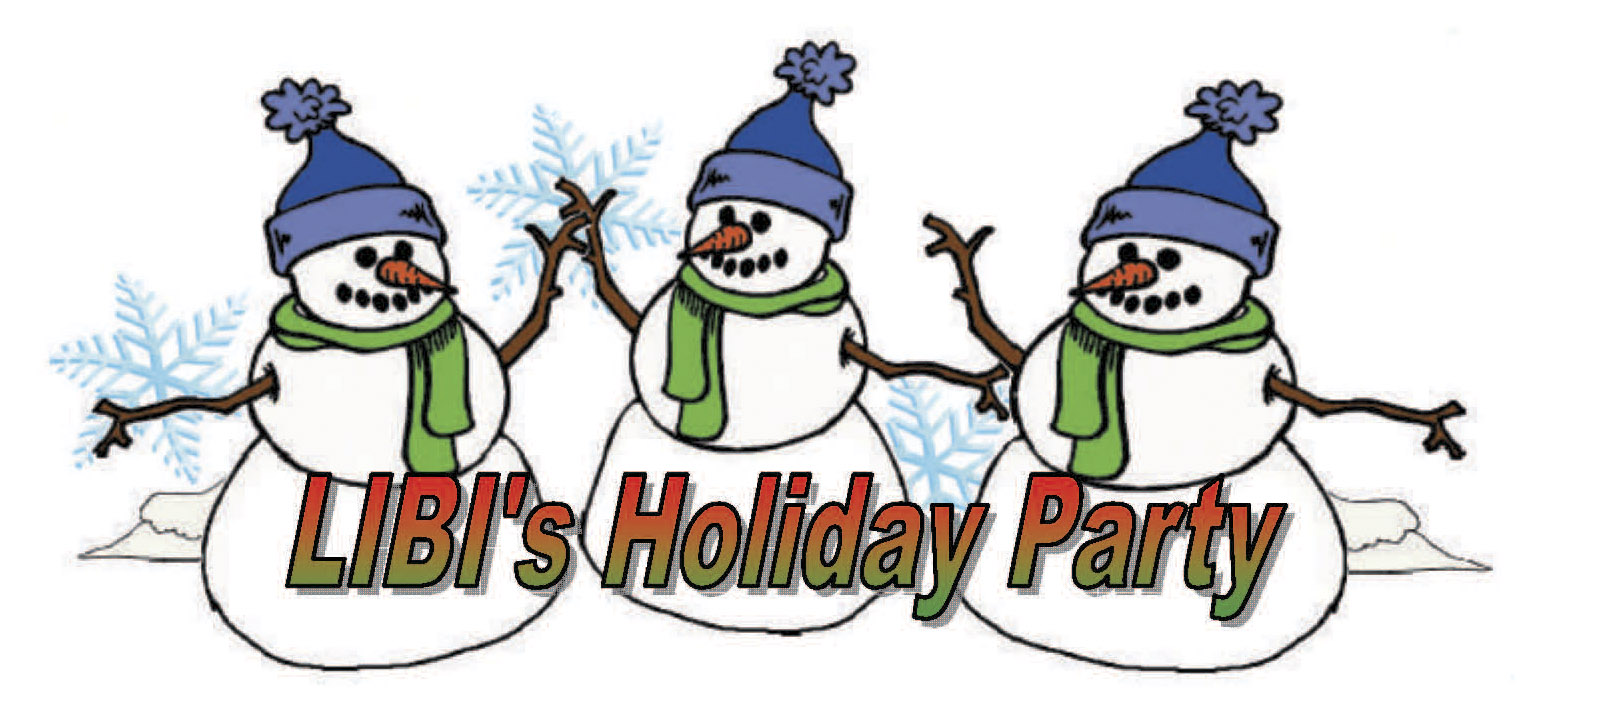 Holiday party clipart clipart